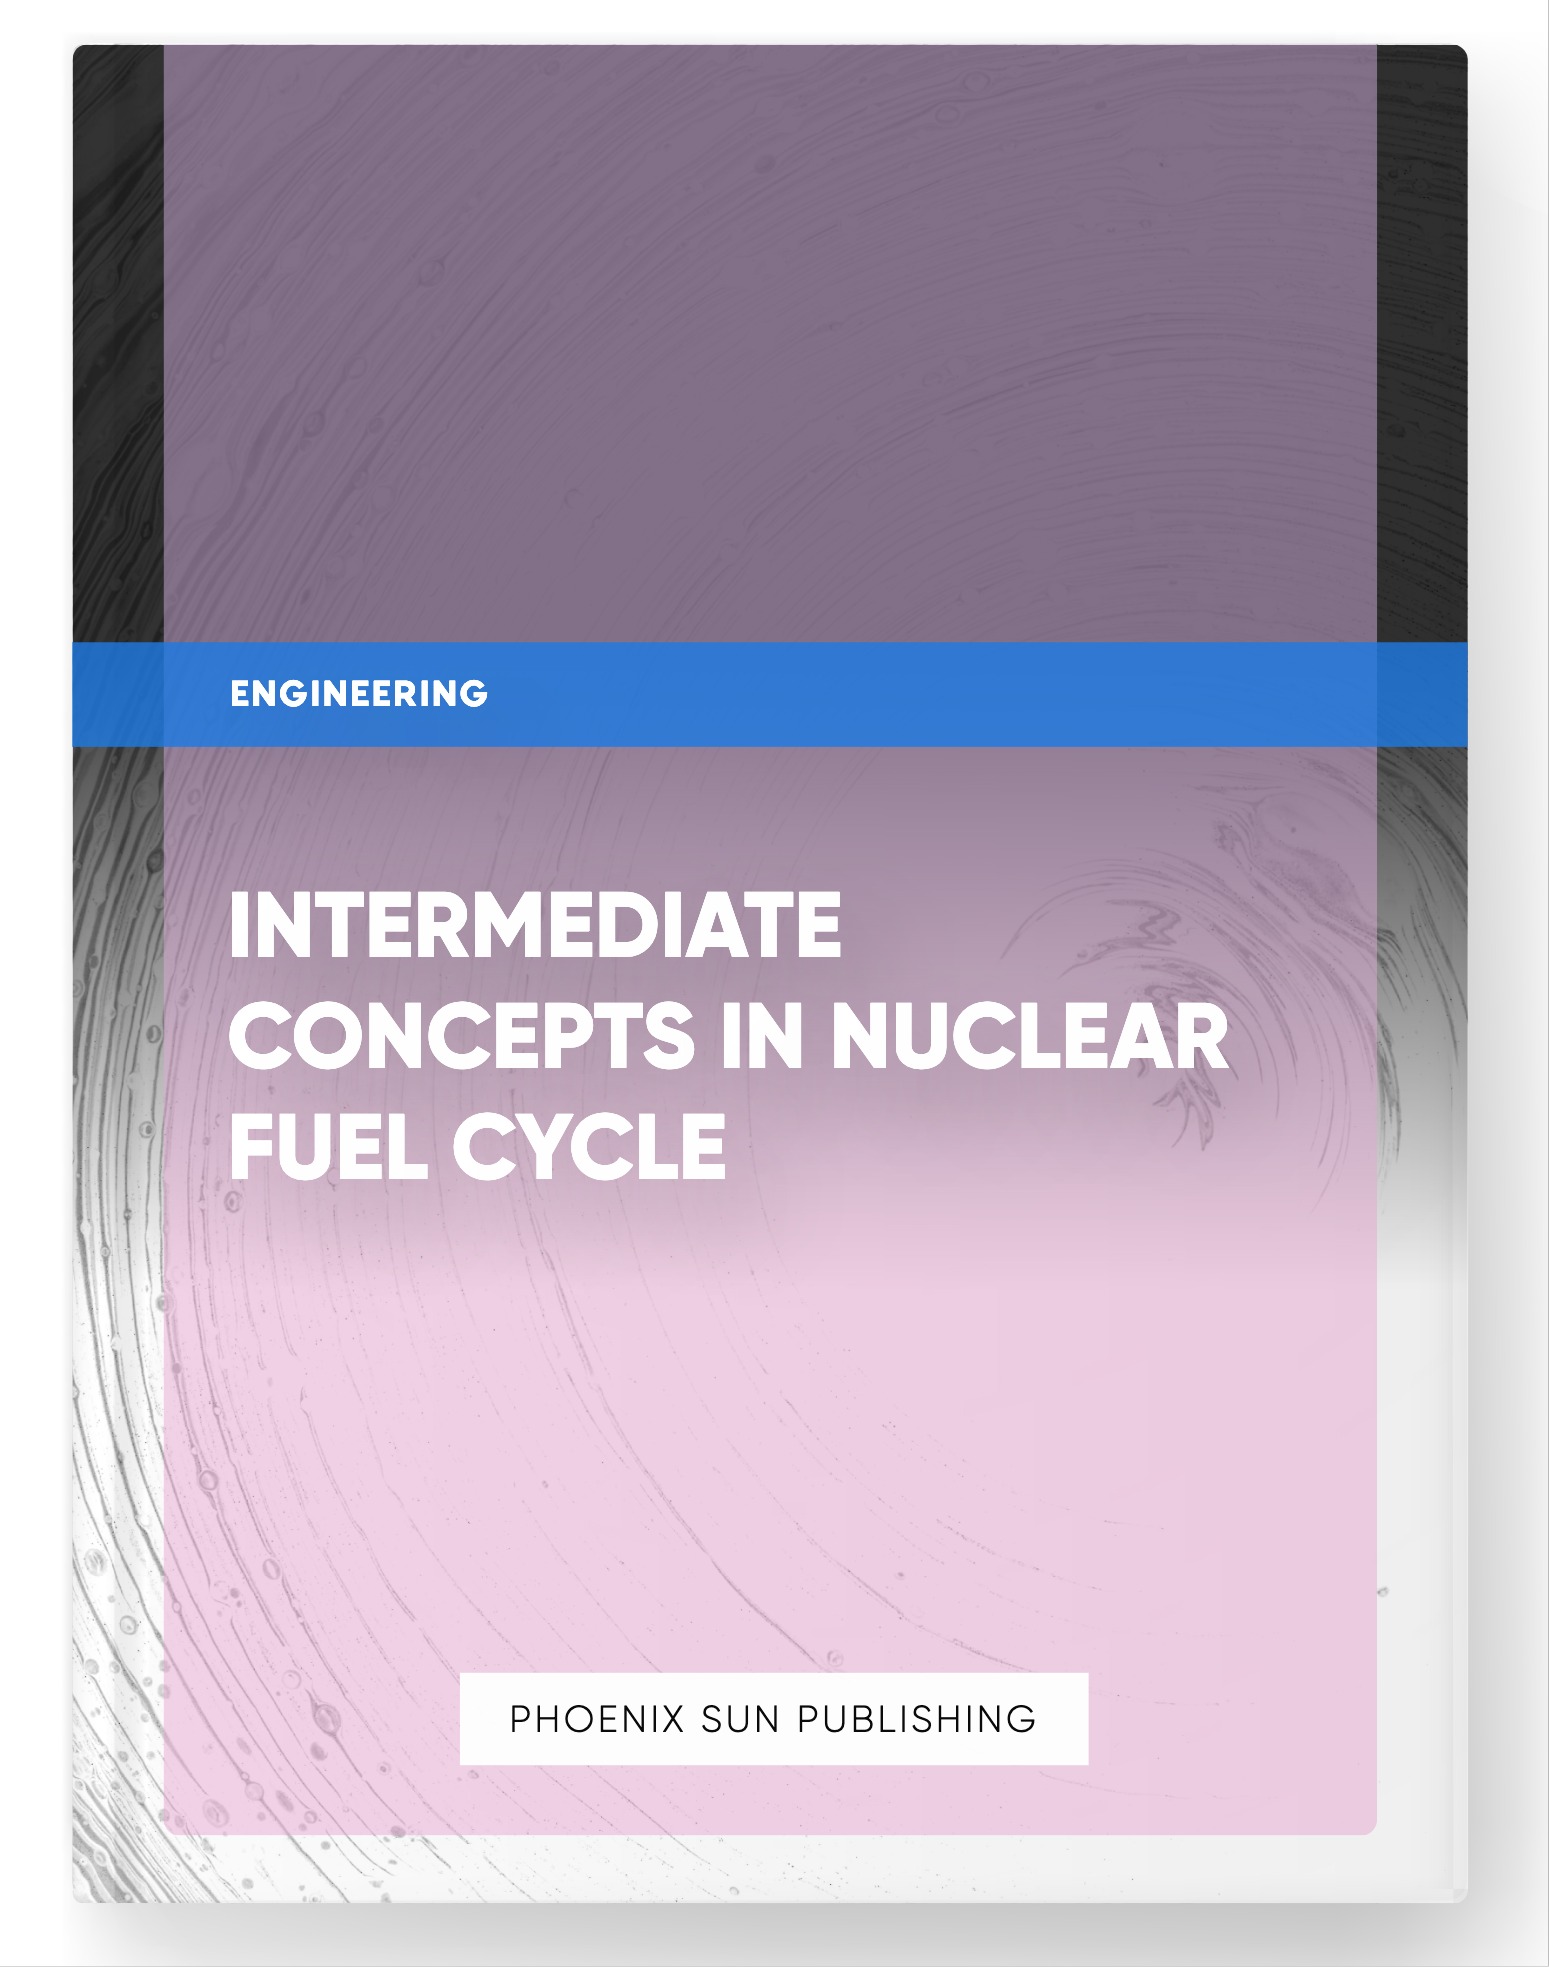 Intermediate Concepts in Nuclear Fuel Cycle